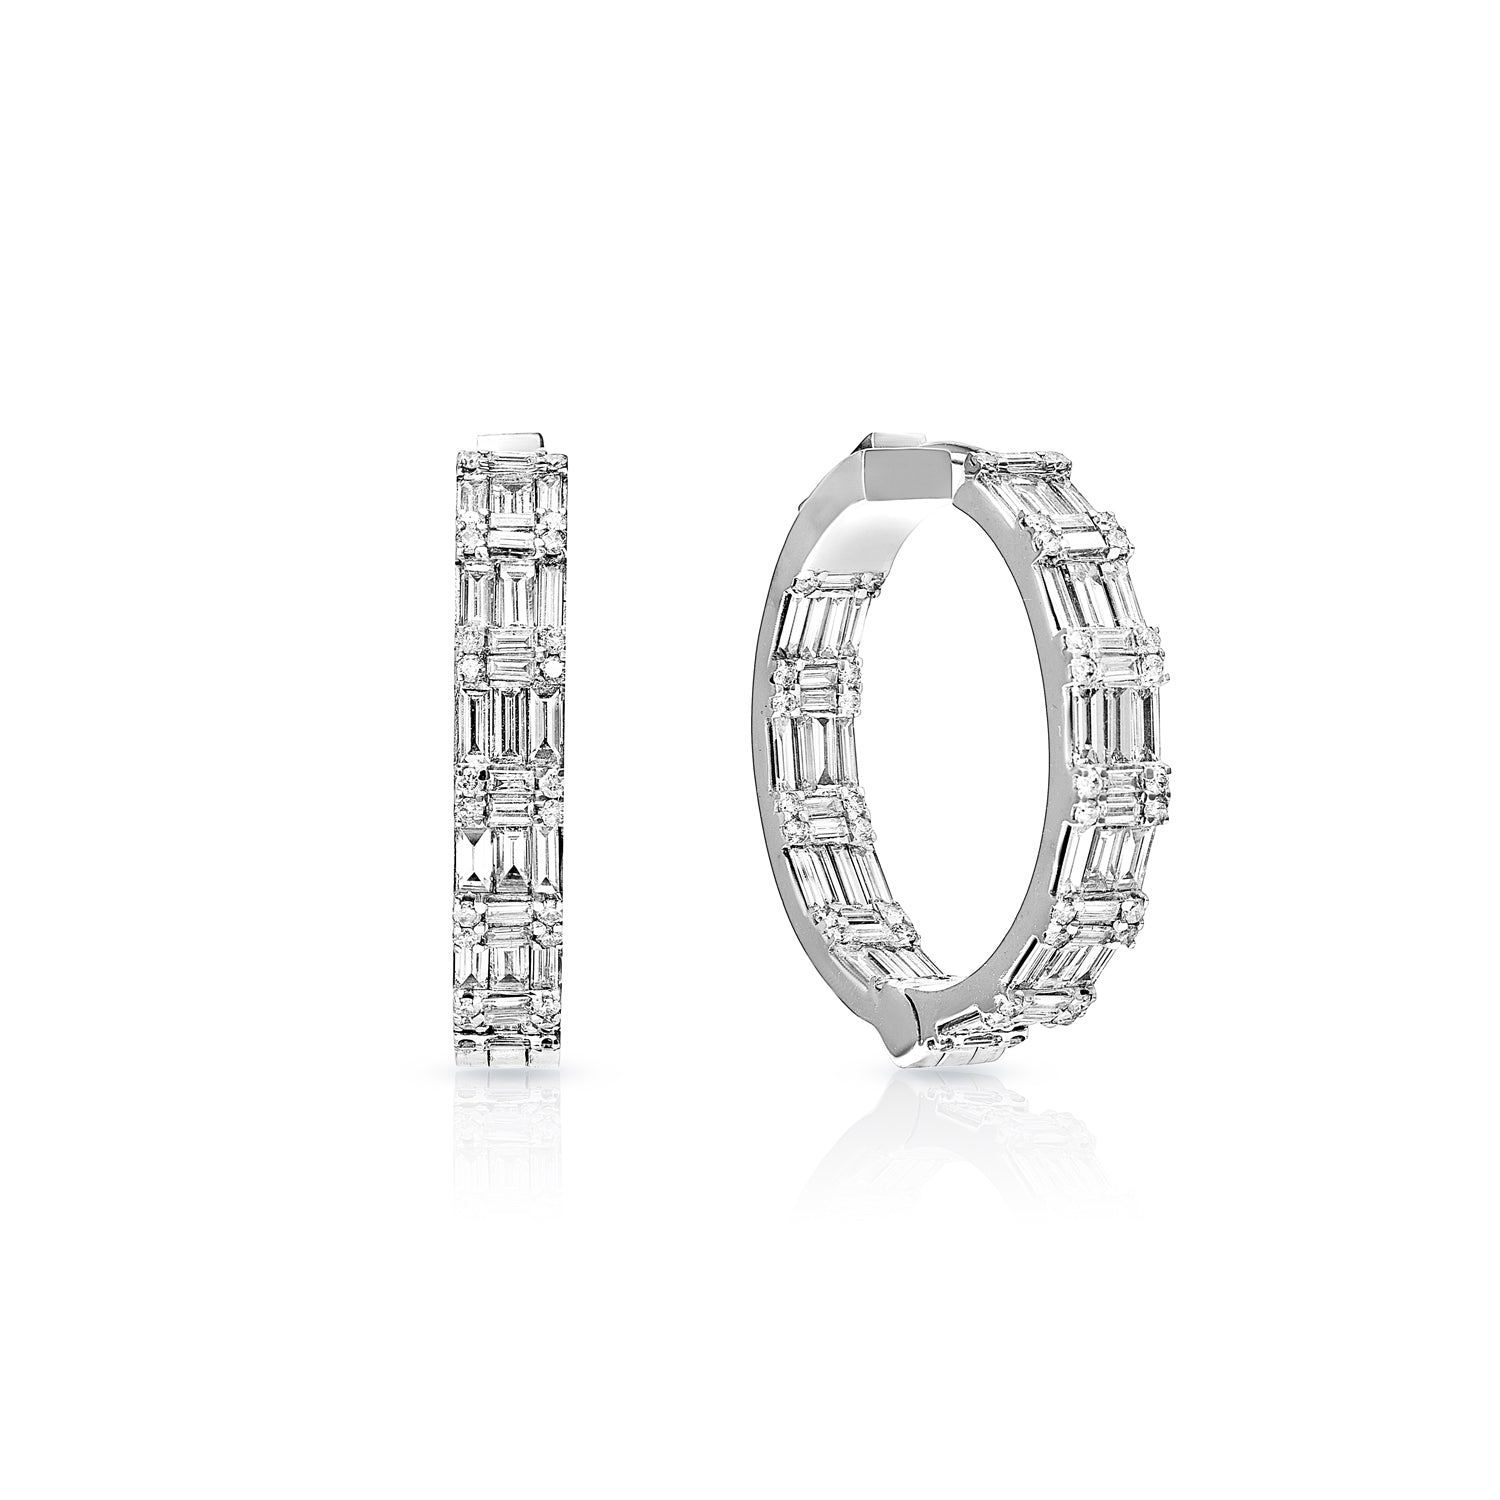 Hailey 5 Carat Combine Mixed Shape Diamond Hoop Earrings for Ladies in 18k White Gold Front and Side View